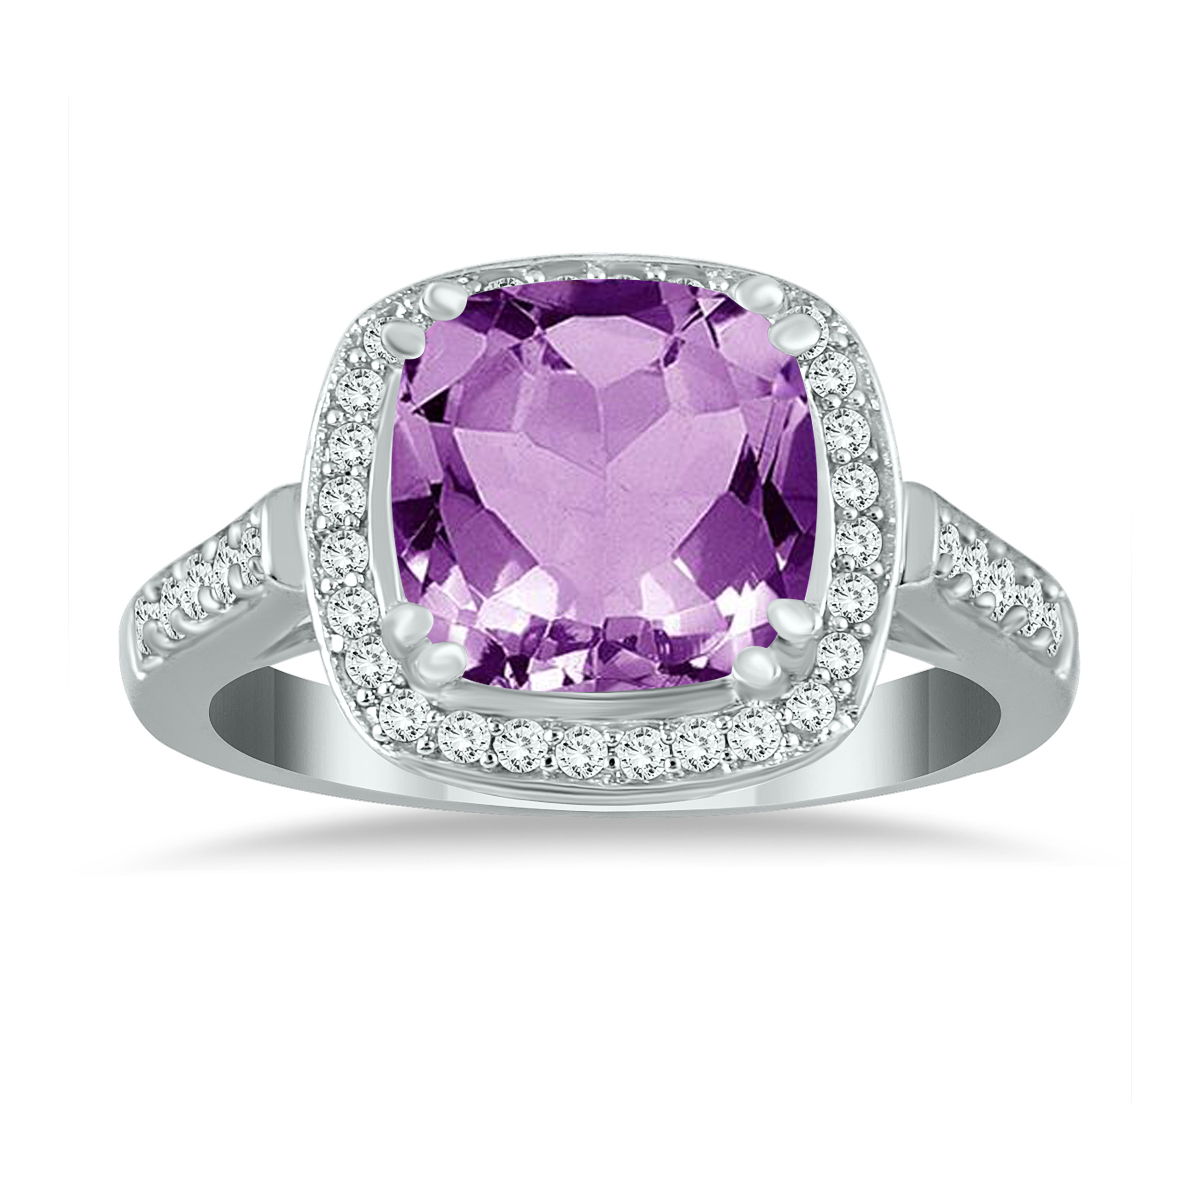 Cushion Cut Amethyst and Diamond Ring in 14K White Gold